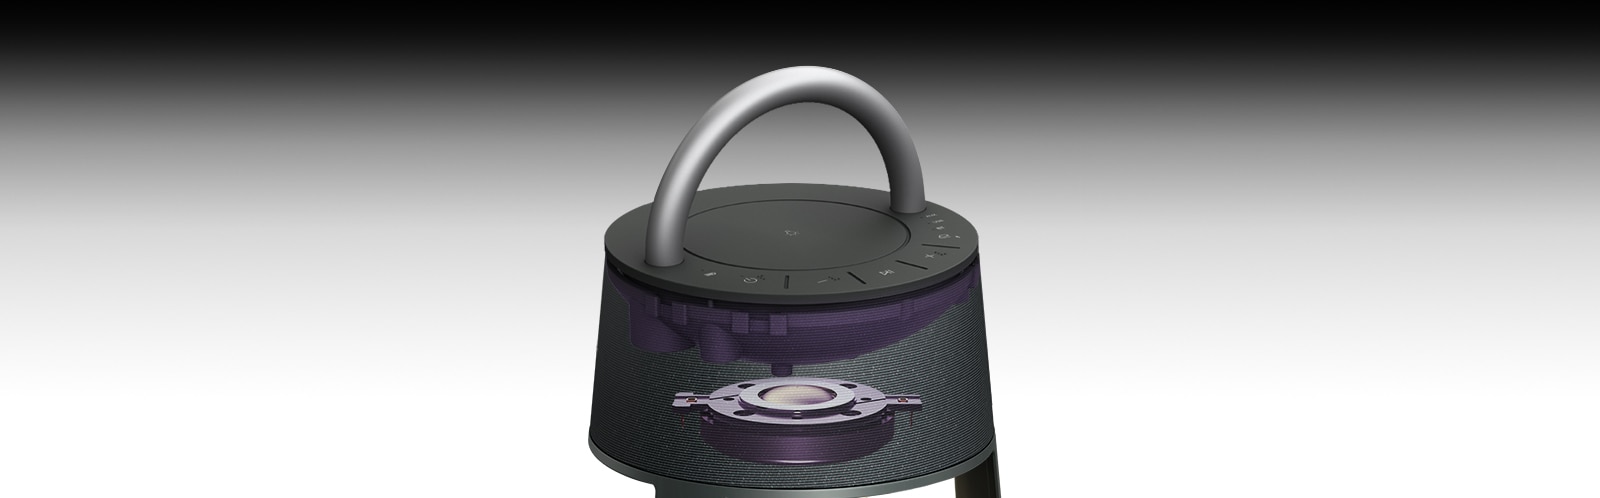 Image showing the Titanium twitter unit at the top of XBOOM 360.